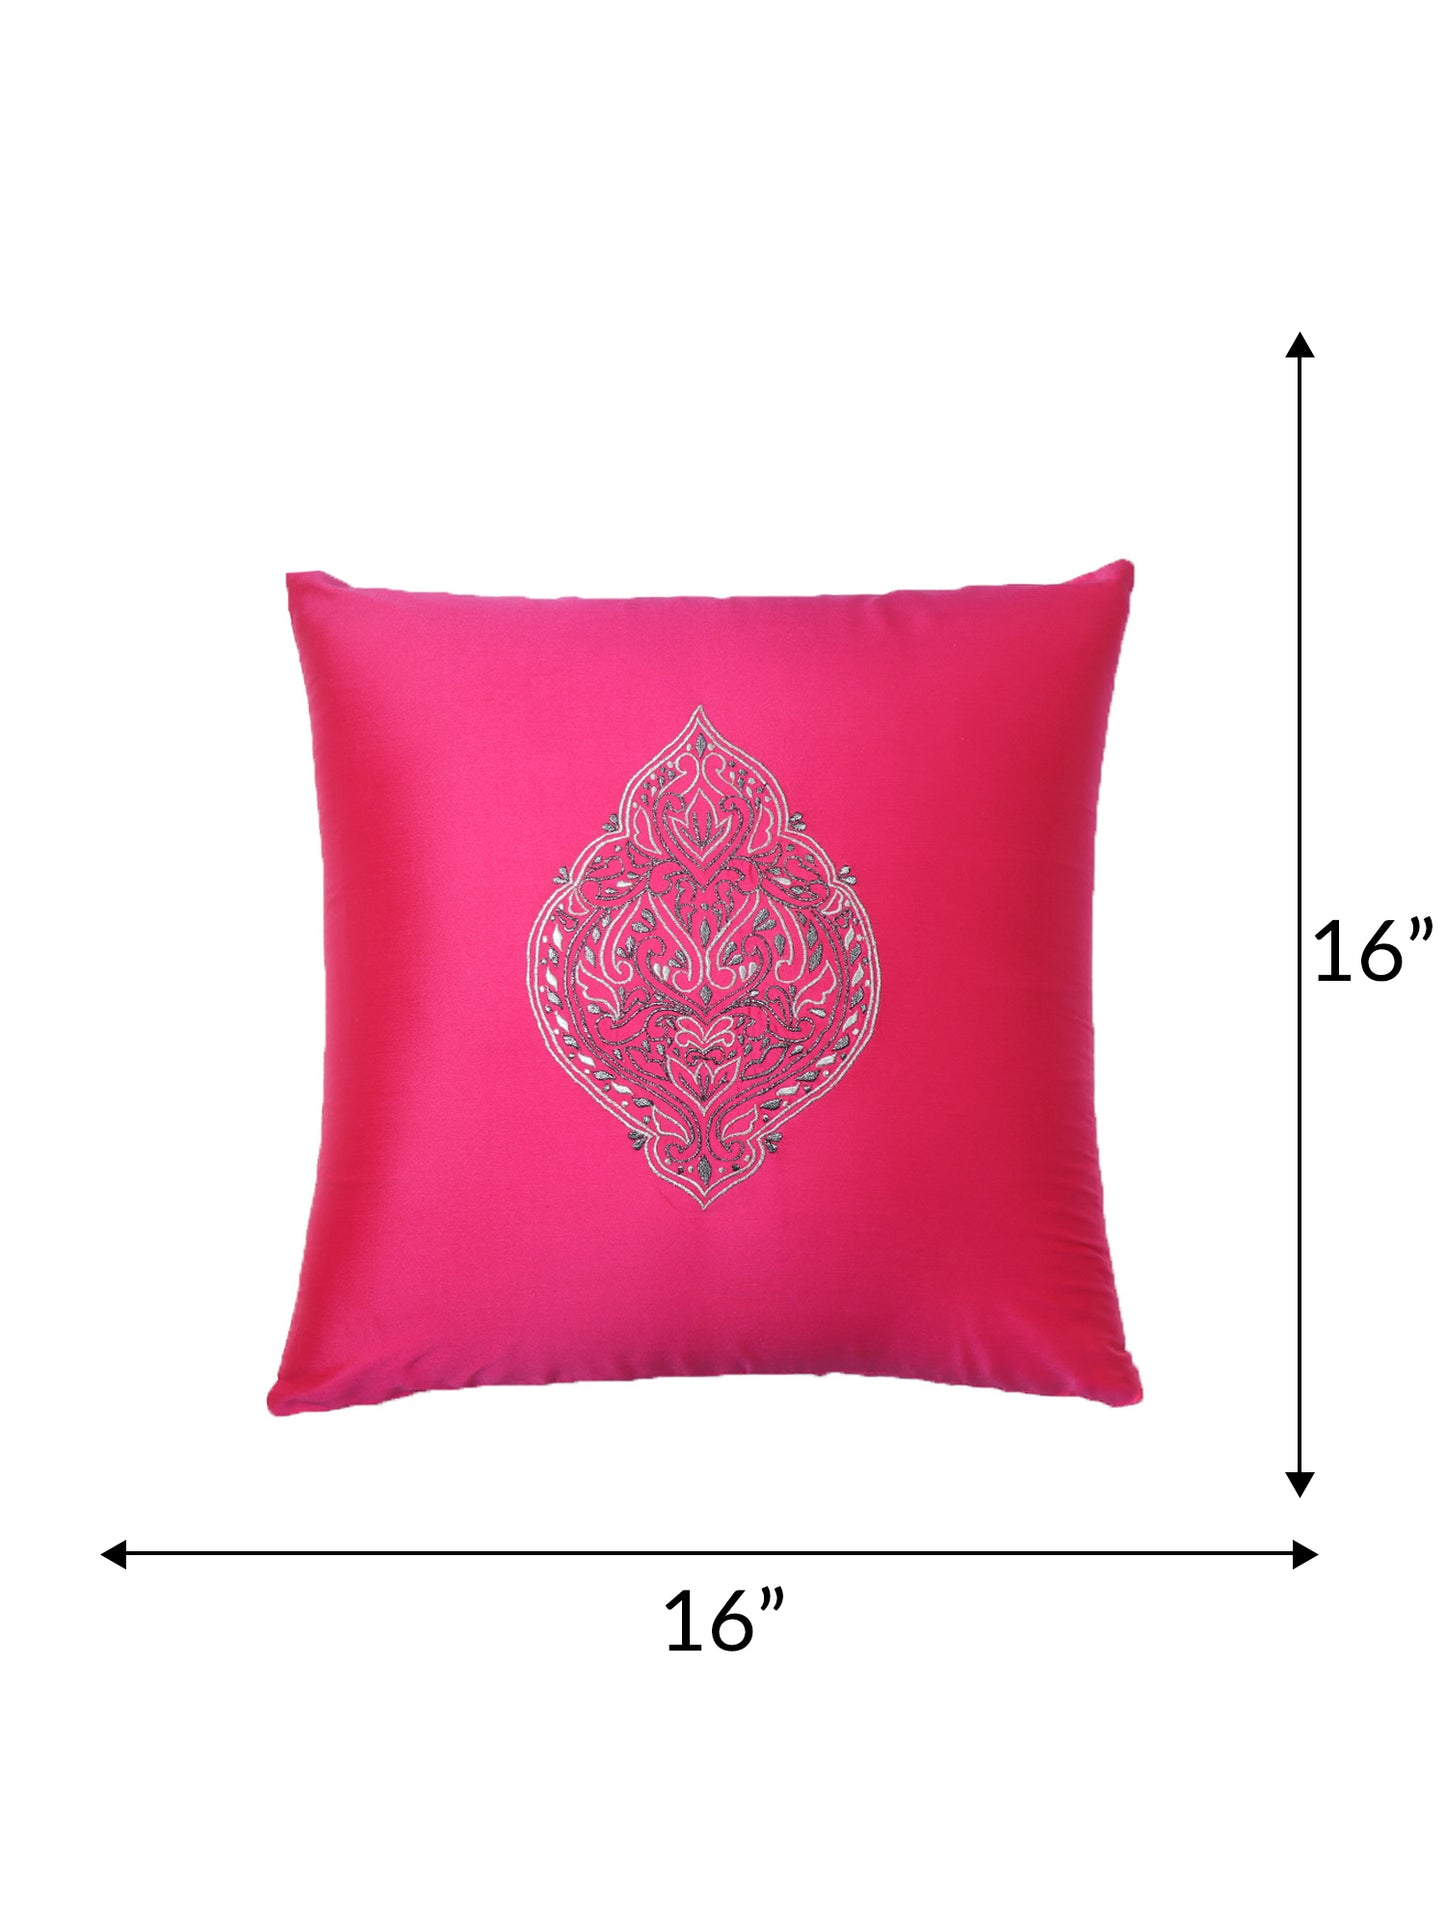 Cushion Cover for Sofa, Bed | Polyester Paisley Motif Embroidery | Multi Color - 16x16in(40x40cm) (Pack of 2)